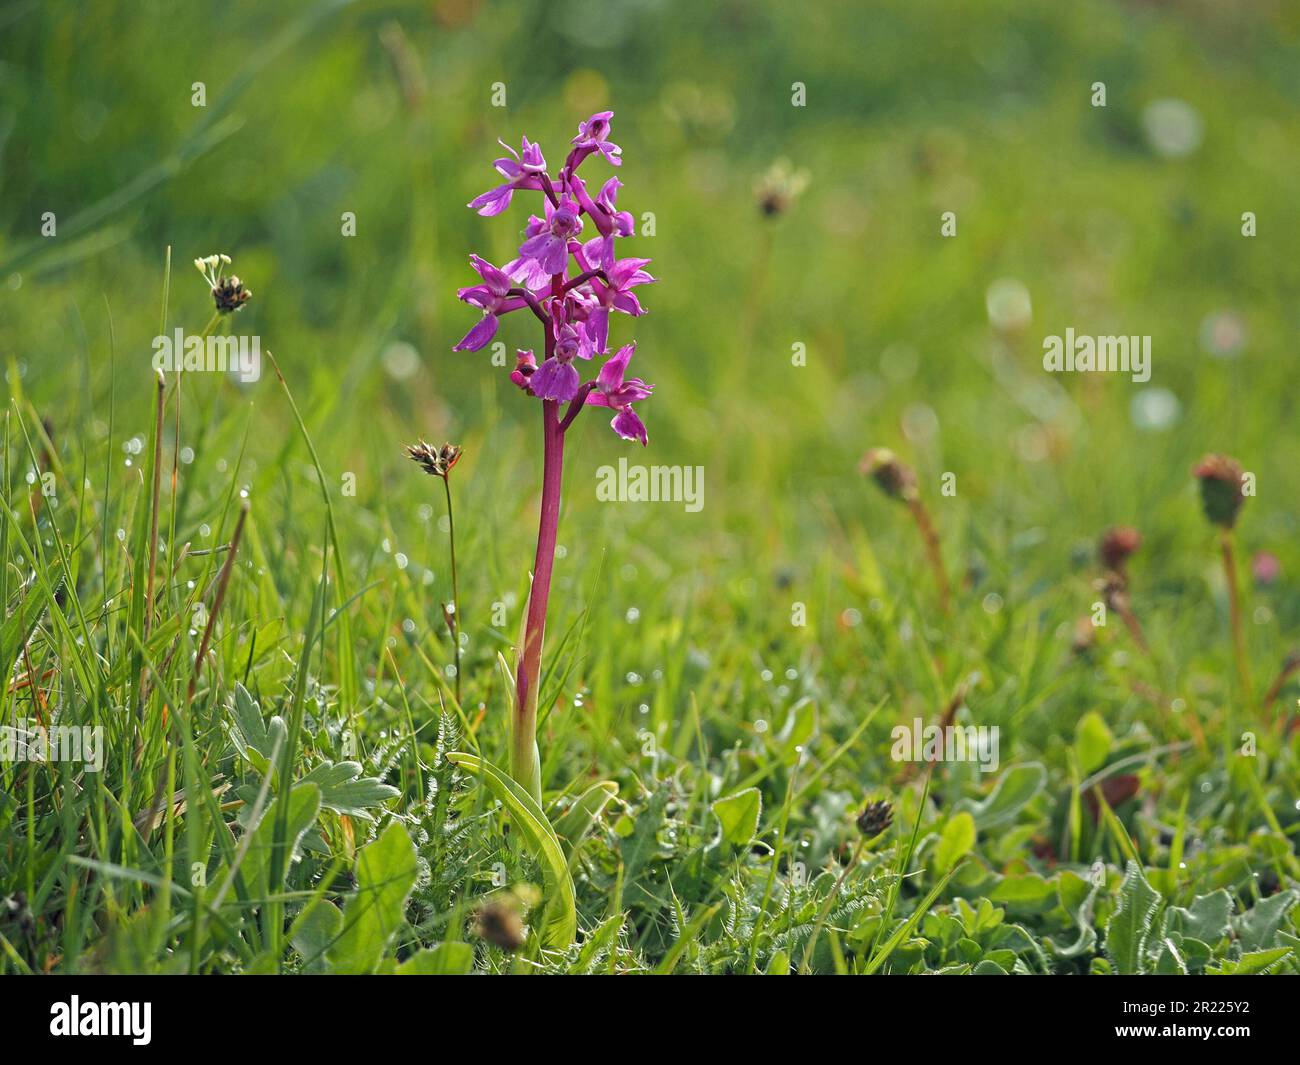 flower spike of Early purple orchid (Orchis mascula) with typical purple flowers growing wild  in Cumbria England UK Stock Photo